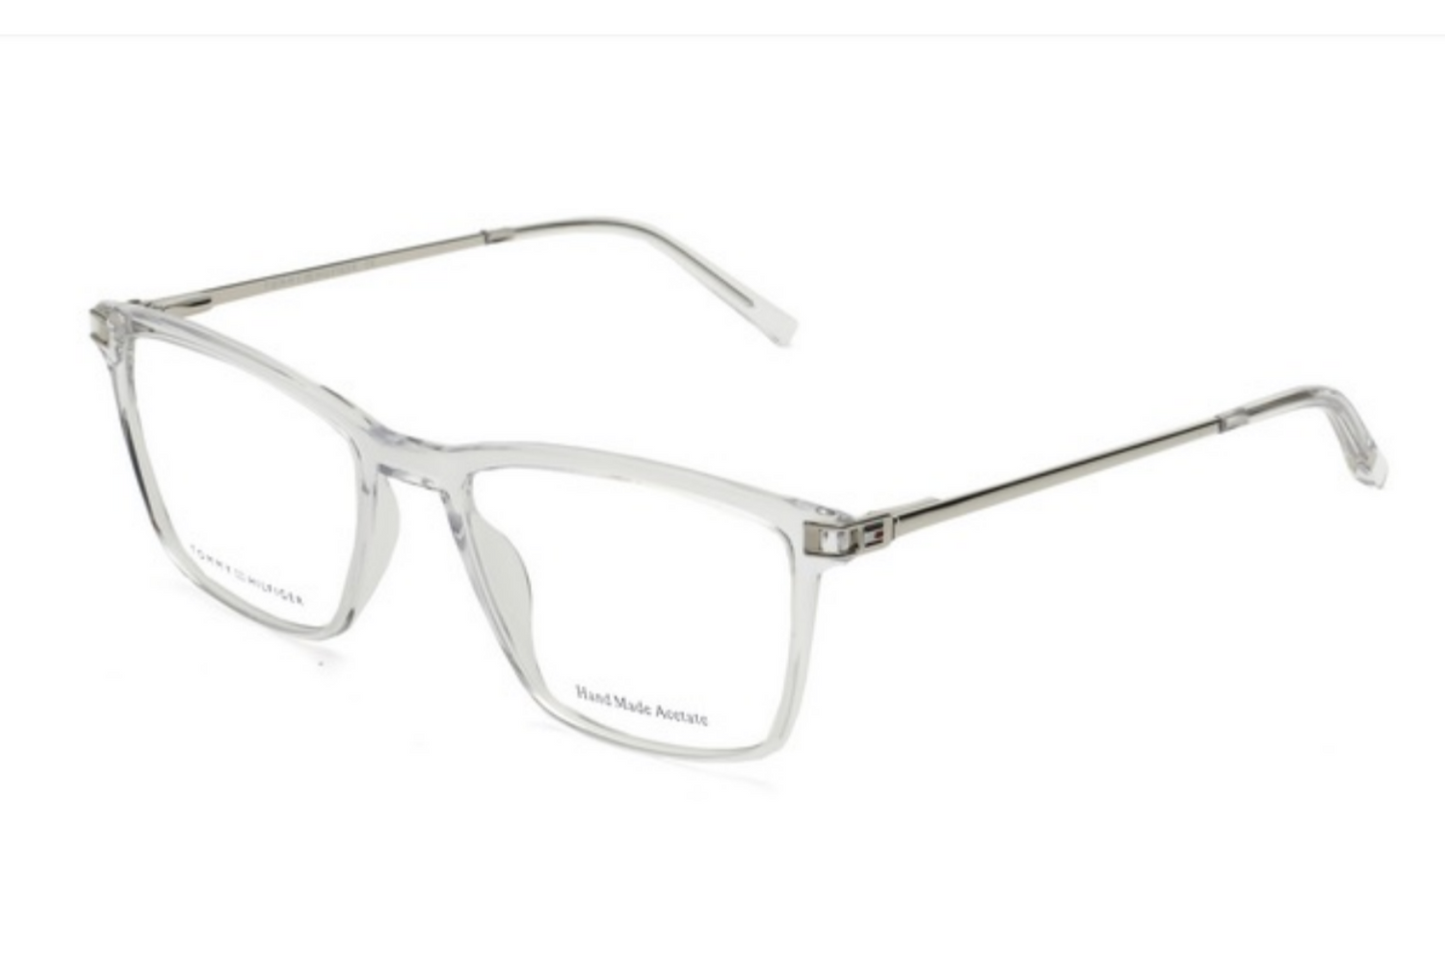 Tommy Hilfiger Frame TH1085 NEW ARRIVAL